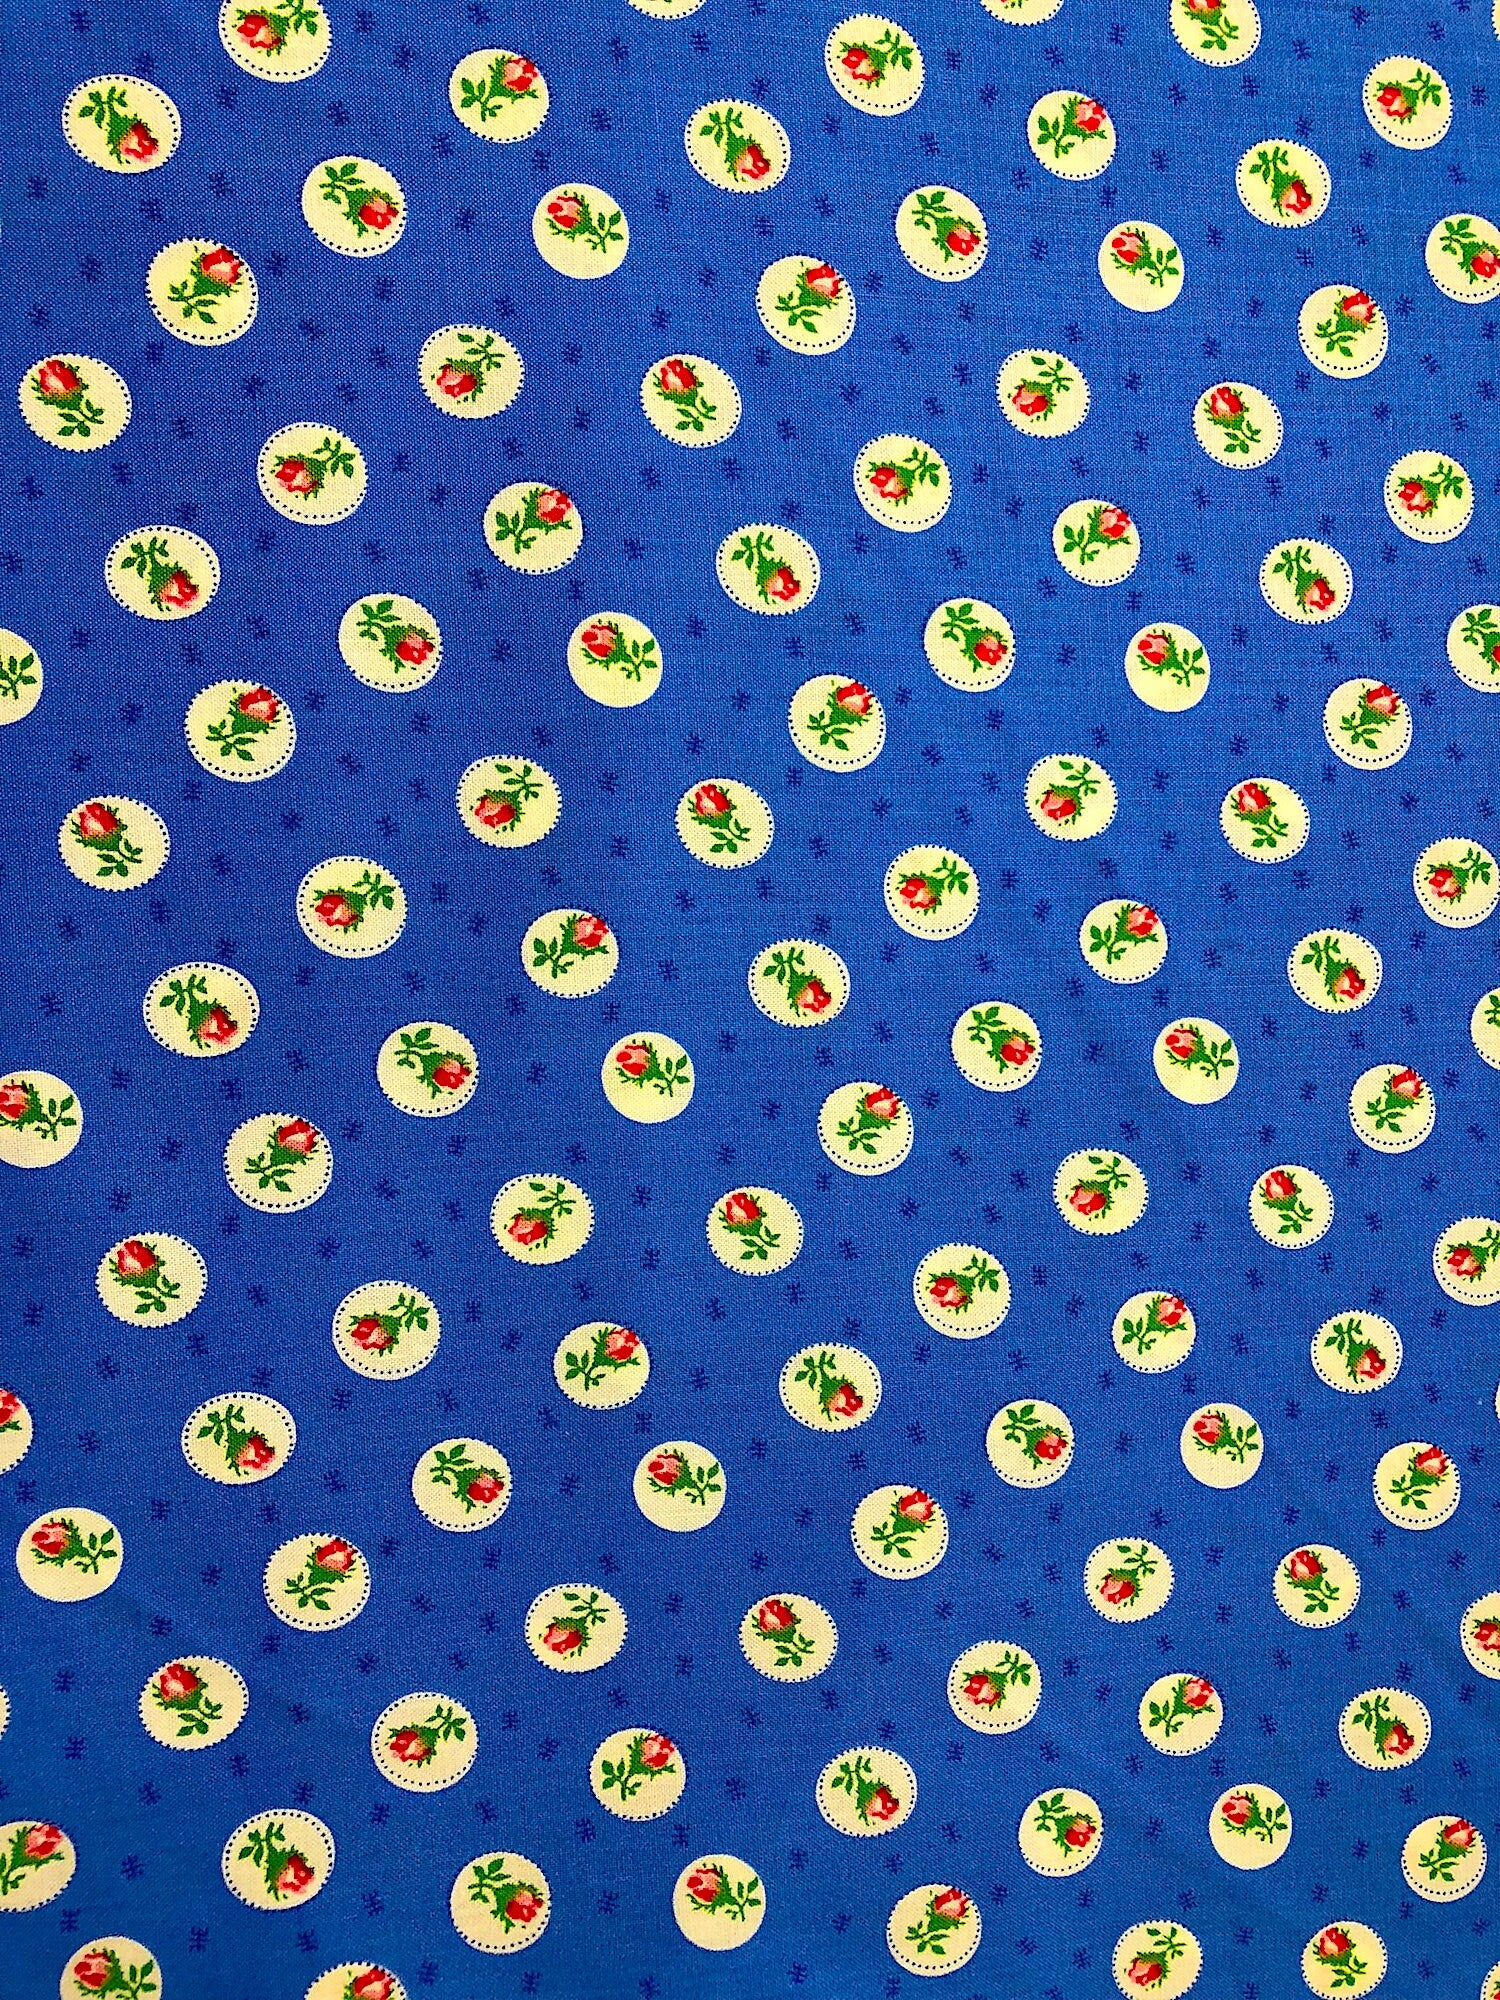 This fabric is called First Blush by Ruby Red Designs. Rosebuds in white circles on a blue background.